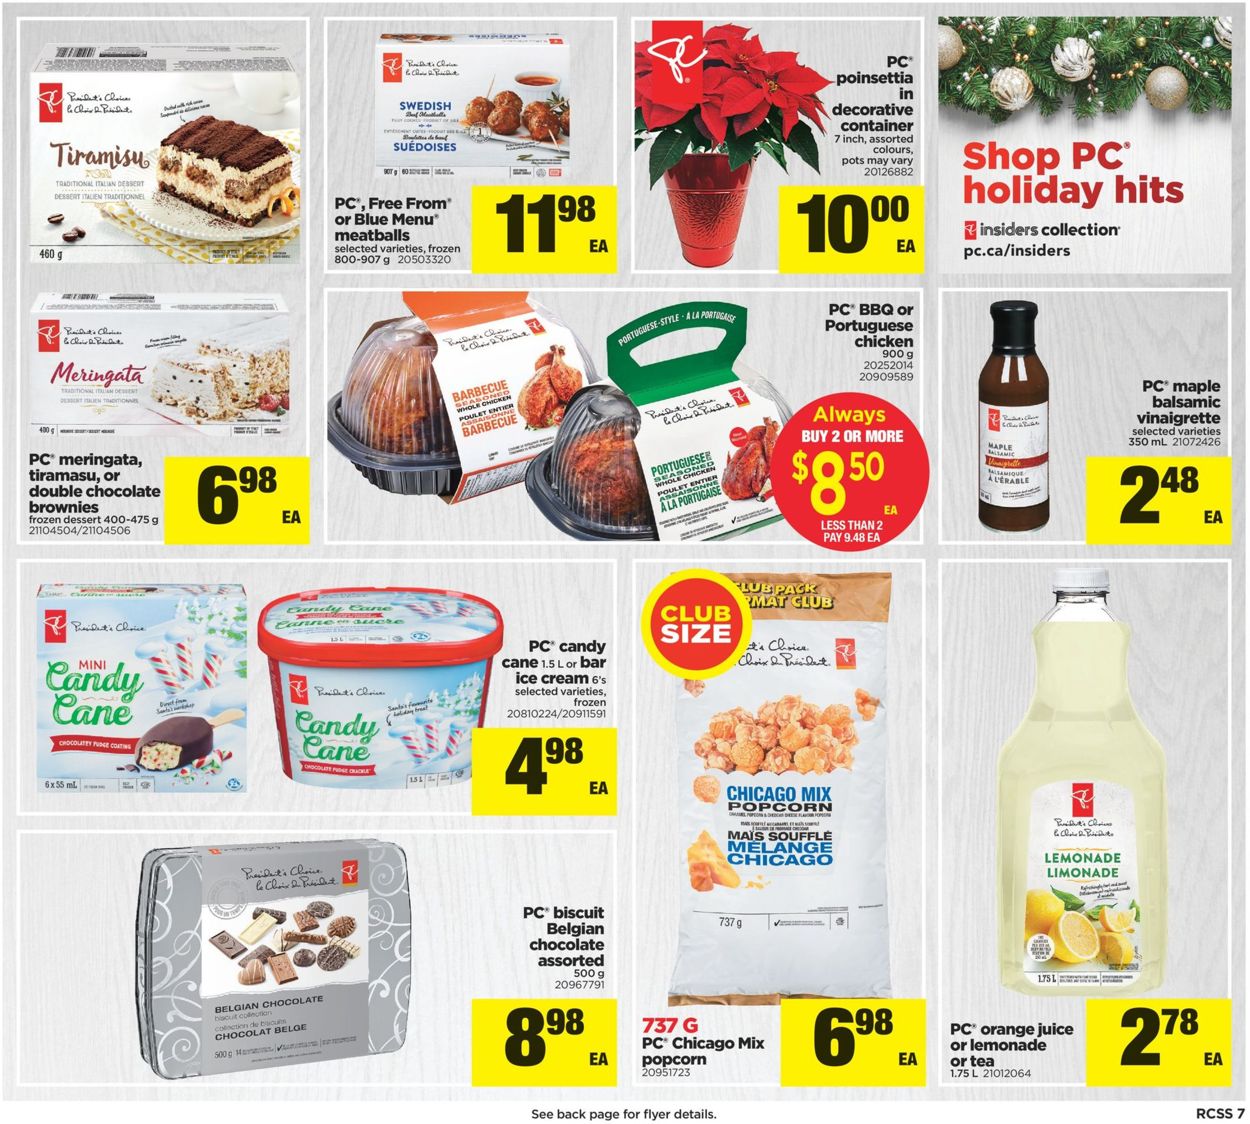 Real Canadian Superstore Flyer from 12/05/2019